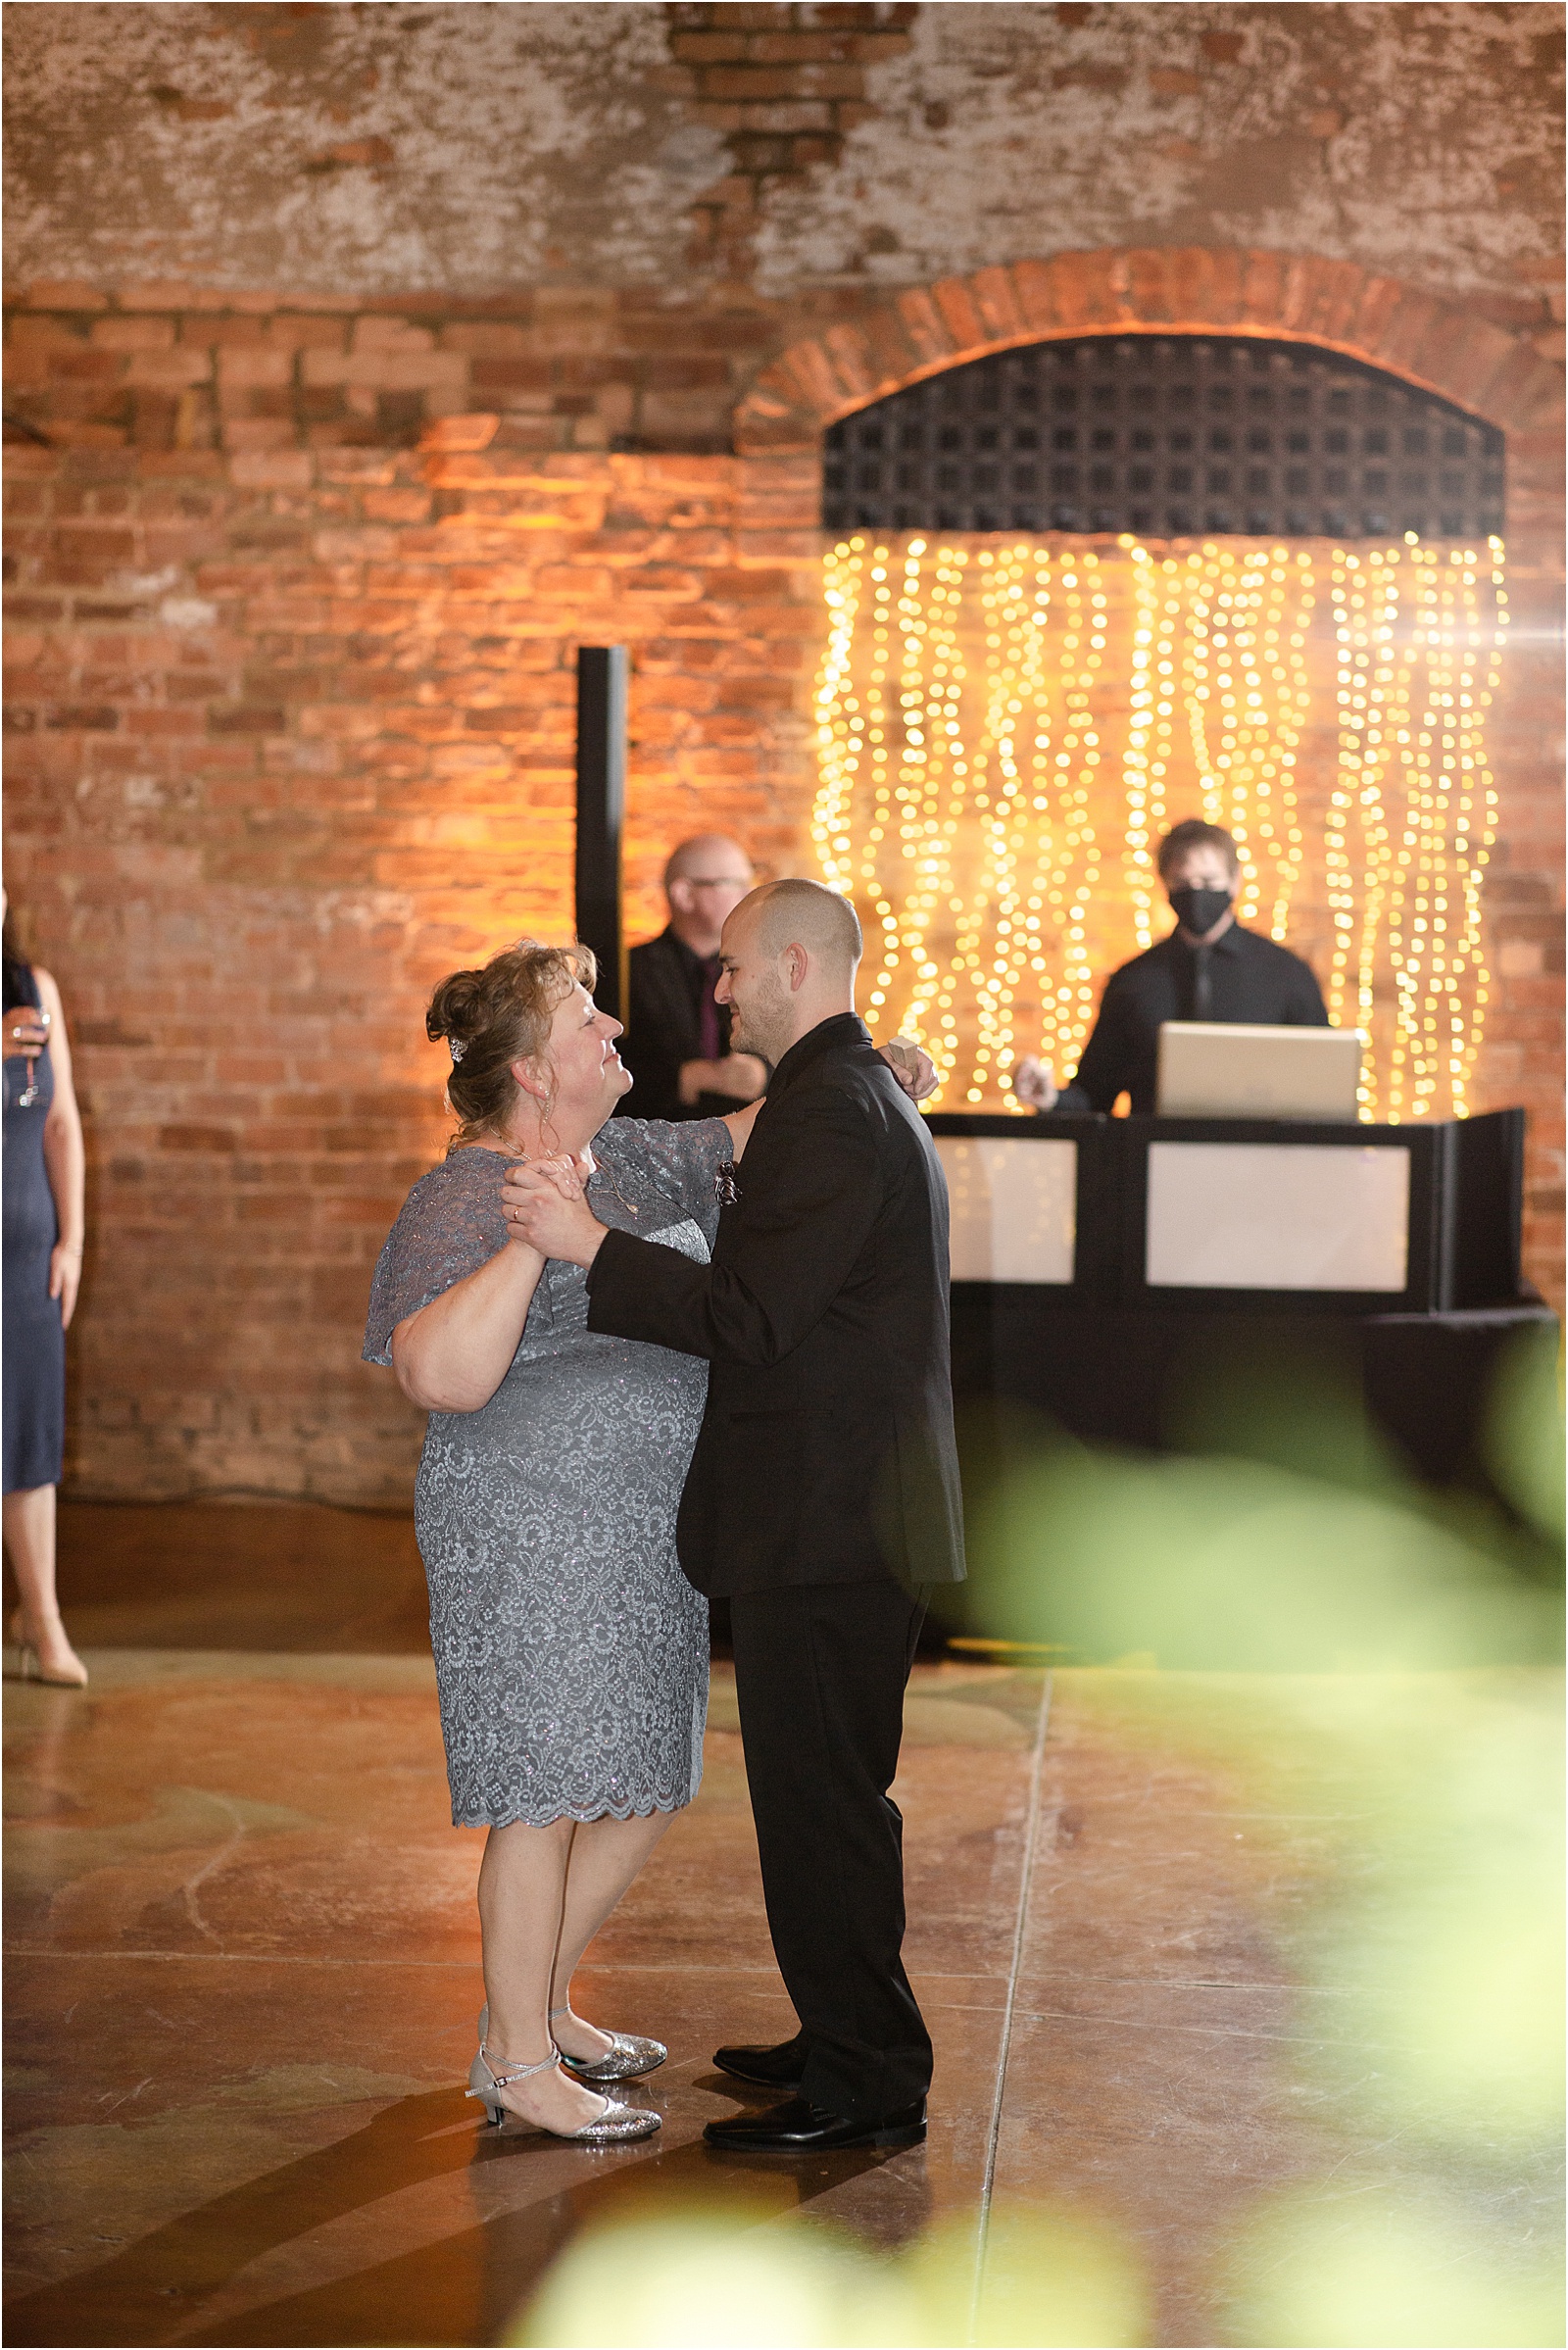 son dancing with his mom at wedding reception